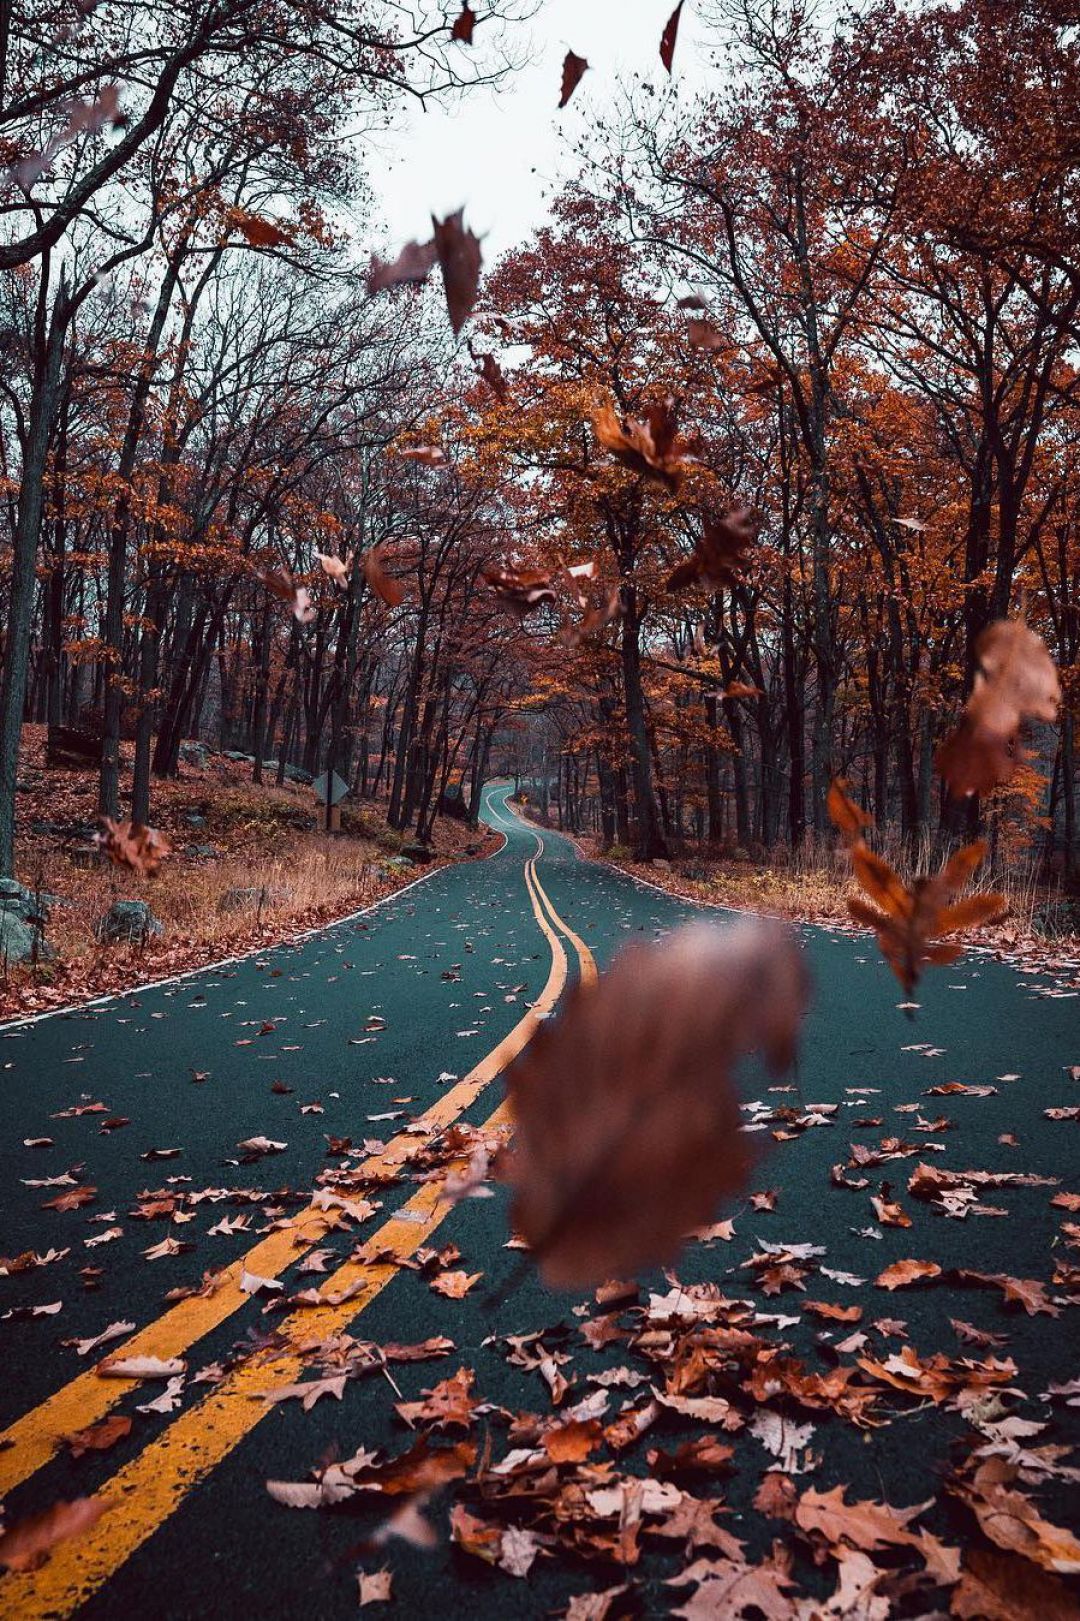 Android, Iphone, Desktop Hd Backgrounds / Wallpapers - Falling Leaves On Road - HD Wallpaper 